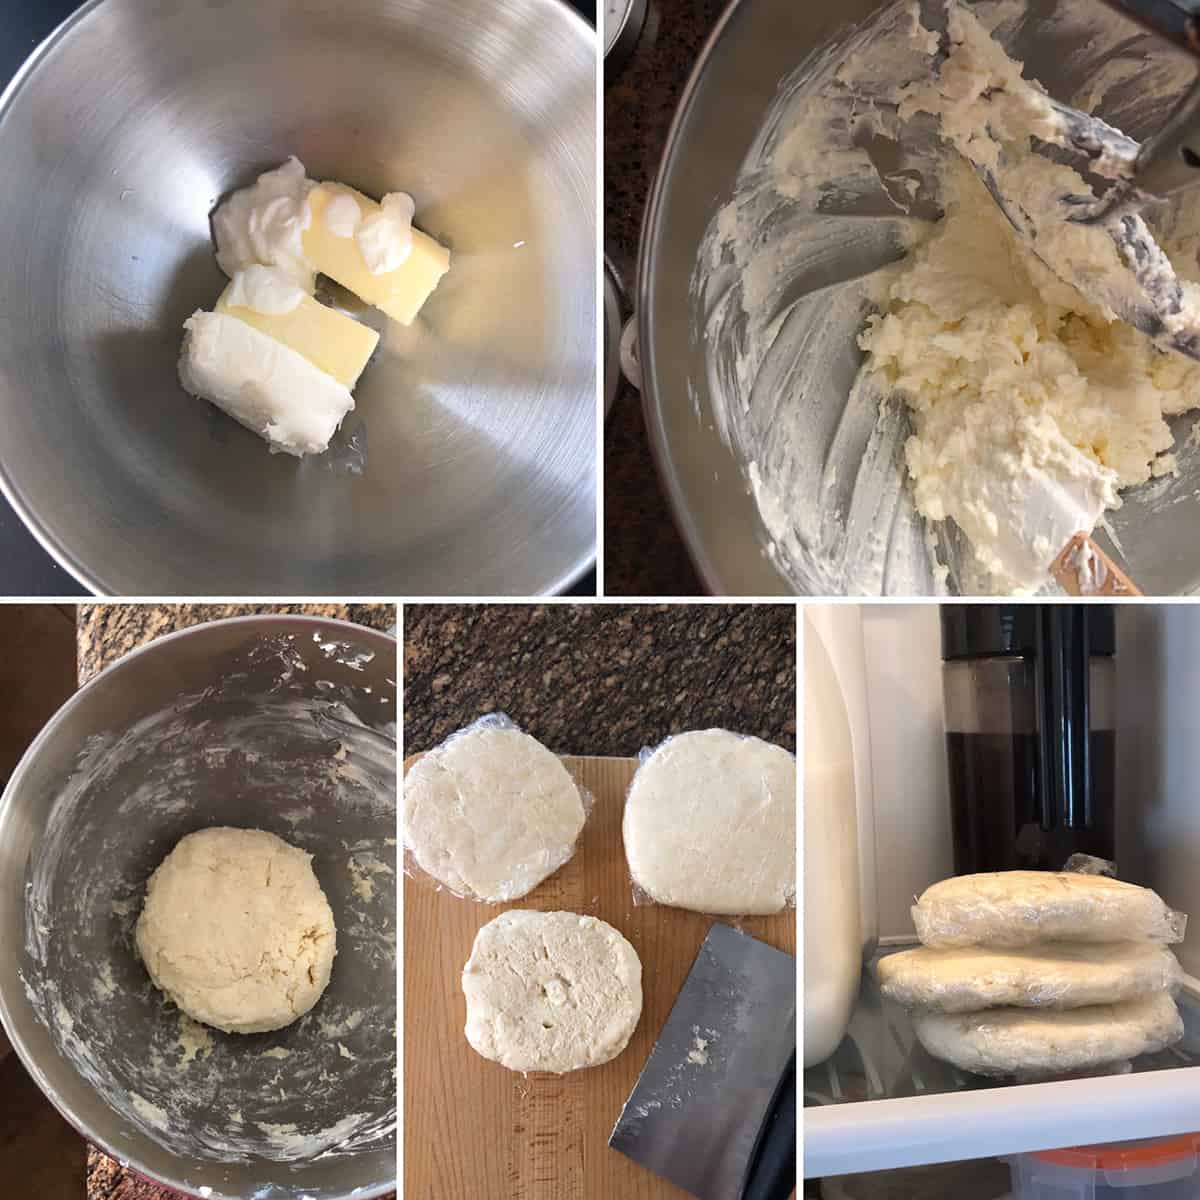 Step by step photos showing the making of the dough